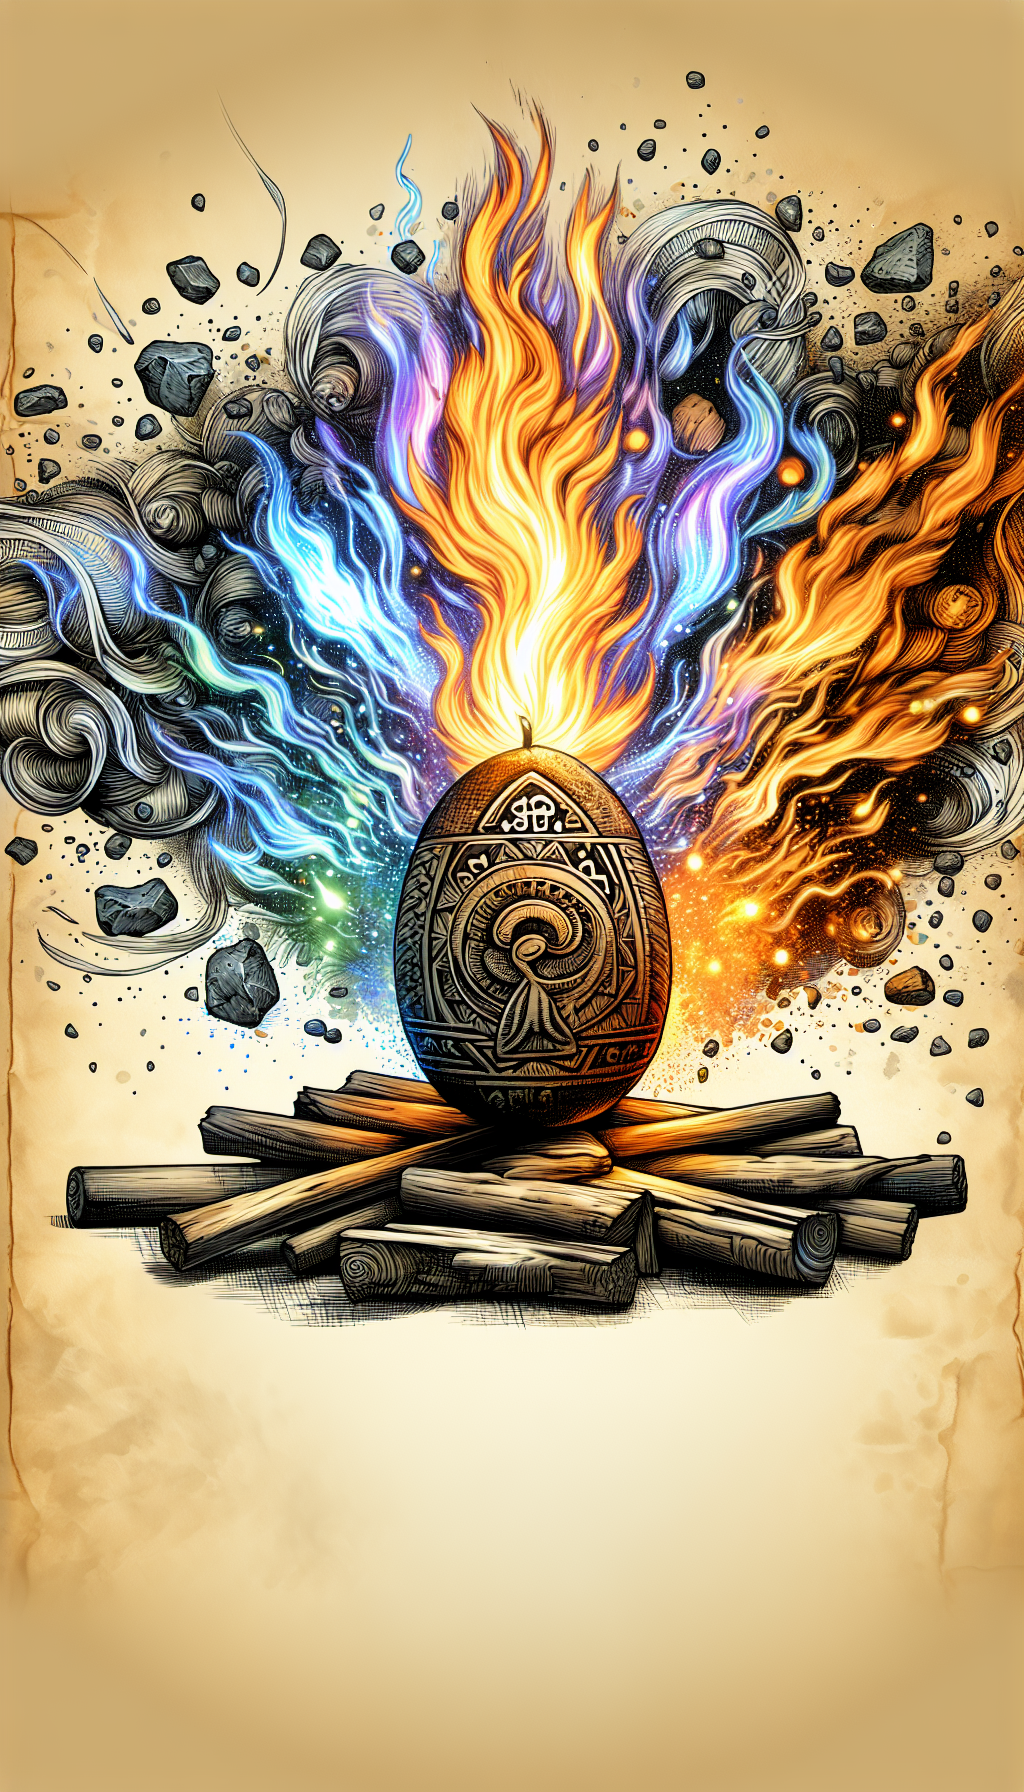 An illustration capturing the metamorphosis of a spark into a roaring flame, with a centerpiece of intricately designed Indian fire starter rocks, glowing amid tender and kindling. Their value is signified by ancient Sanskrit engravings that shimmer in the firelight. Styles merge as the rocks are realistically detailed against a stylized, almost totemic flame background that transitions from fine-line art to luminous watercolor hues.